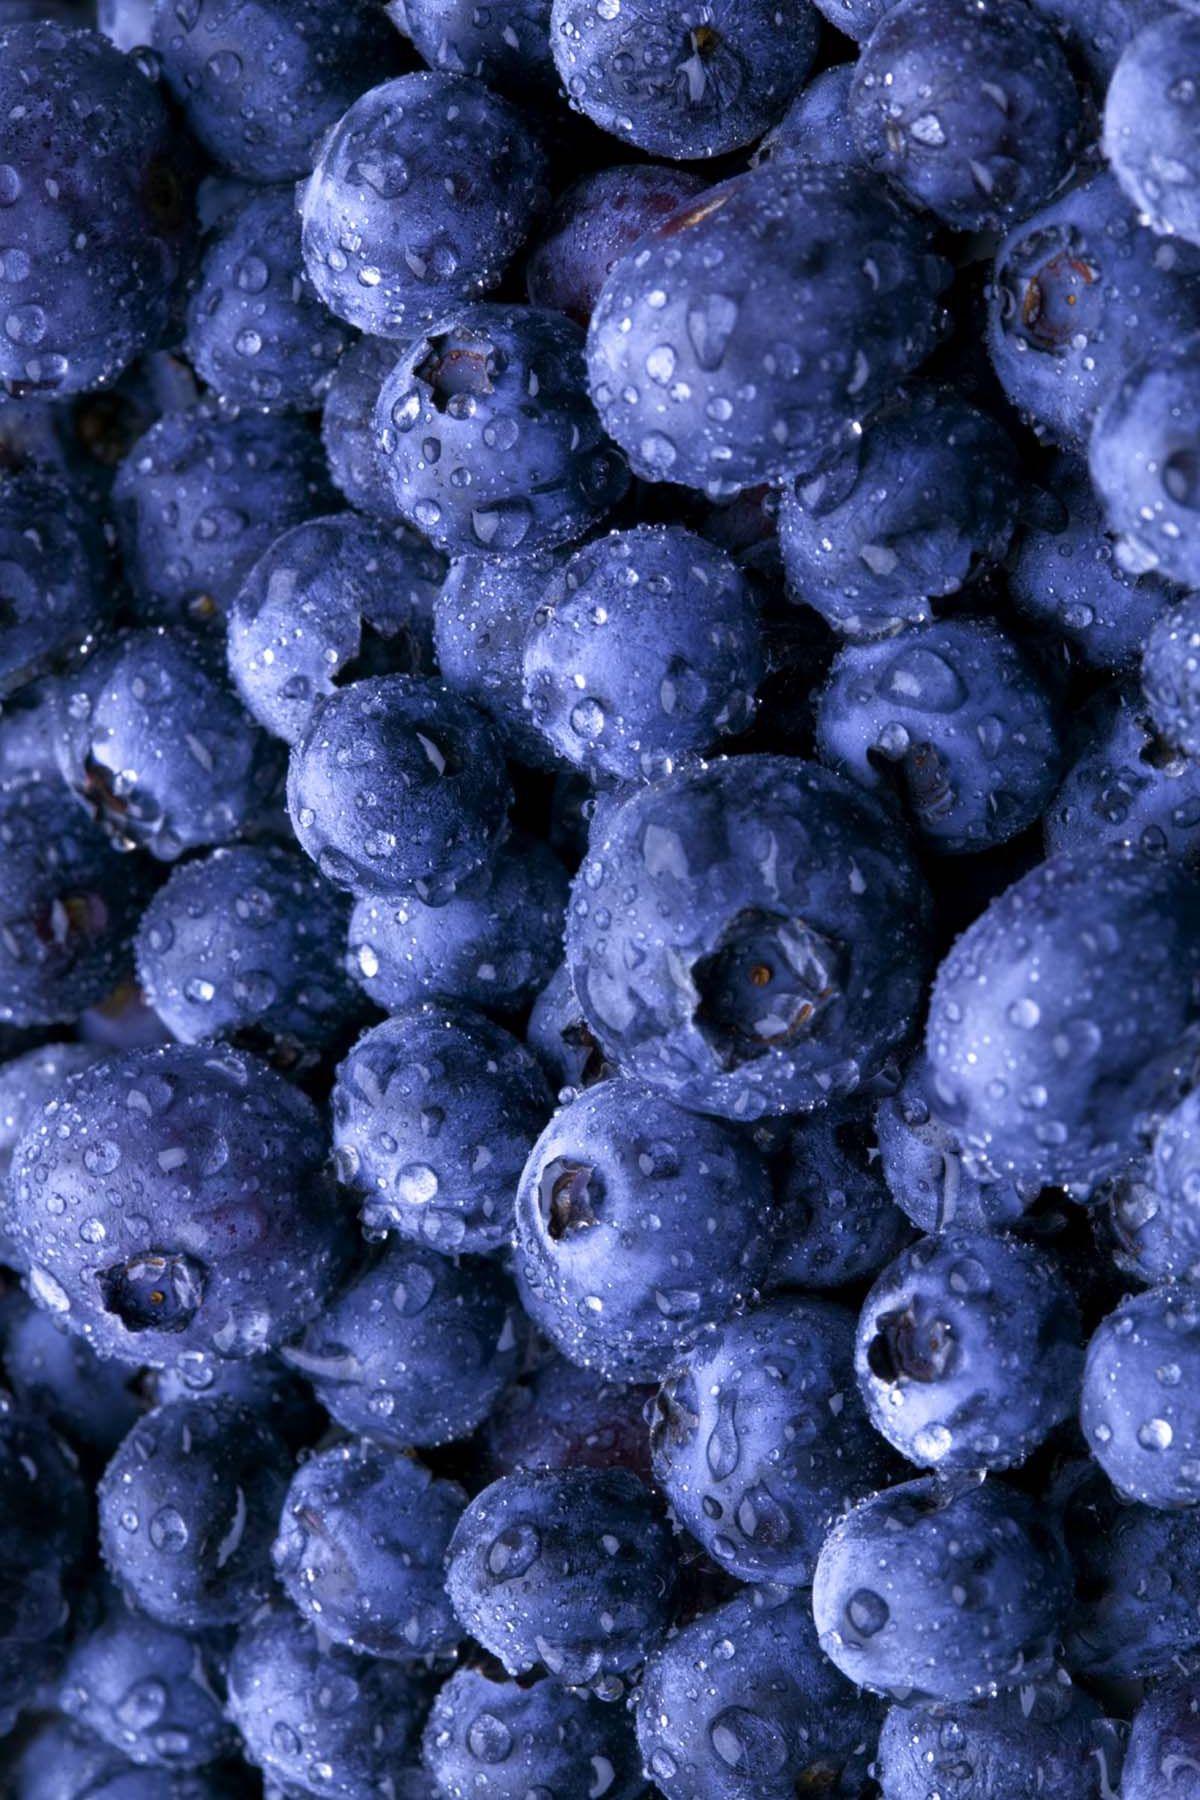 Blueberry Mobile Phone Wallpaper Images Free Download on Lovepik  400465489